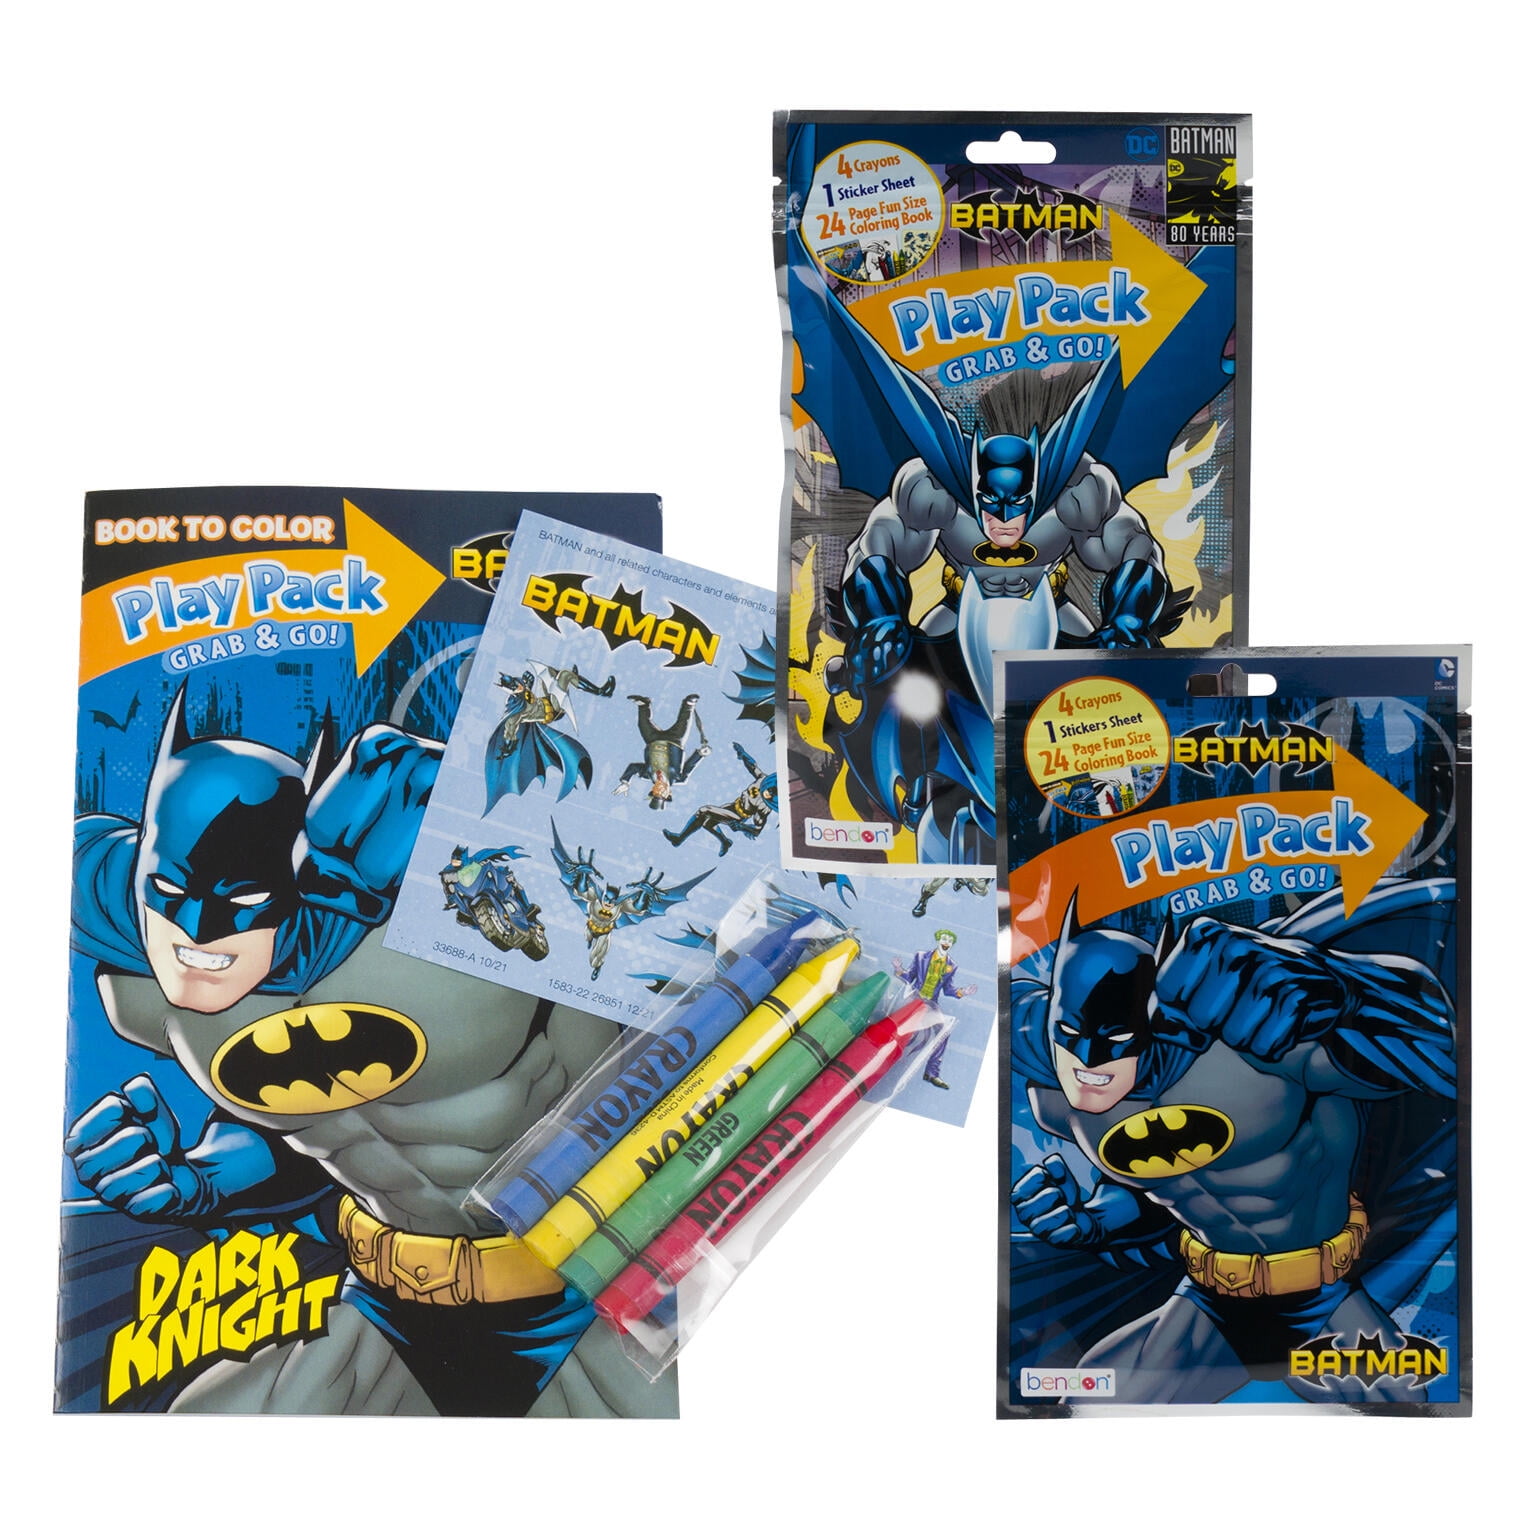 DC Comics Batman Party Favors Pack ~ Bundle of 6 Batman Play Packs Filled with Stickers, Coloring Books, Crayons with Bonus